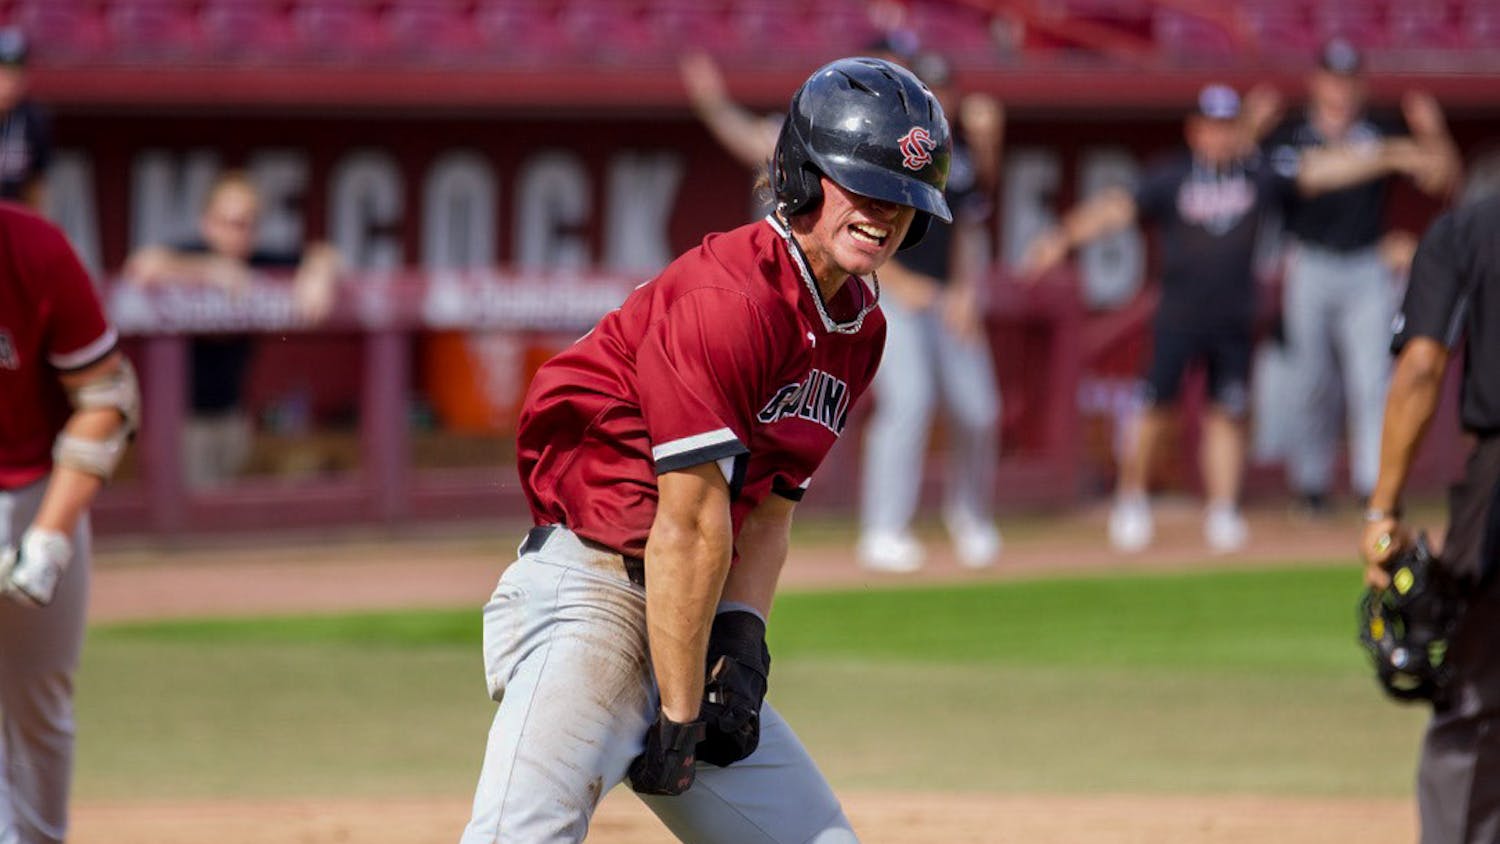 Sophomore outfielder Evan Stone celebrates scoring an early run for the Garnet team on Nov. 5, 2022. Stone participated in 46 games with Gamecocks last season, starting a total of 28 times.